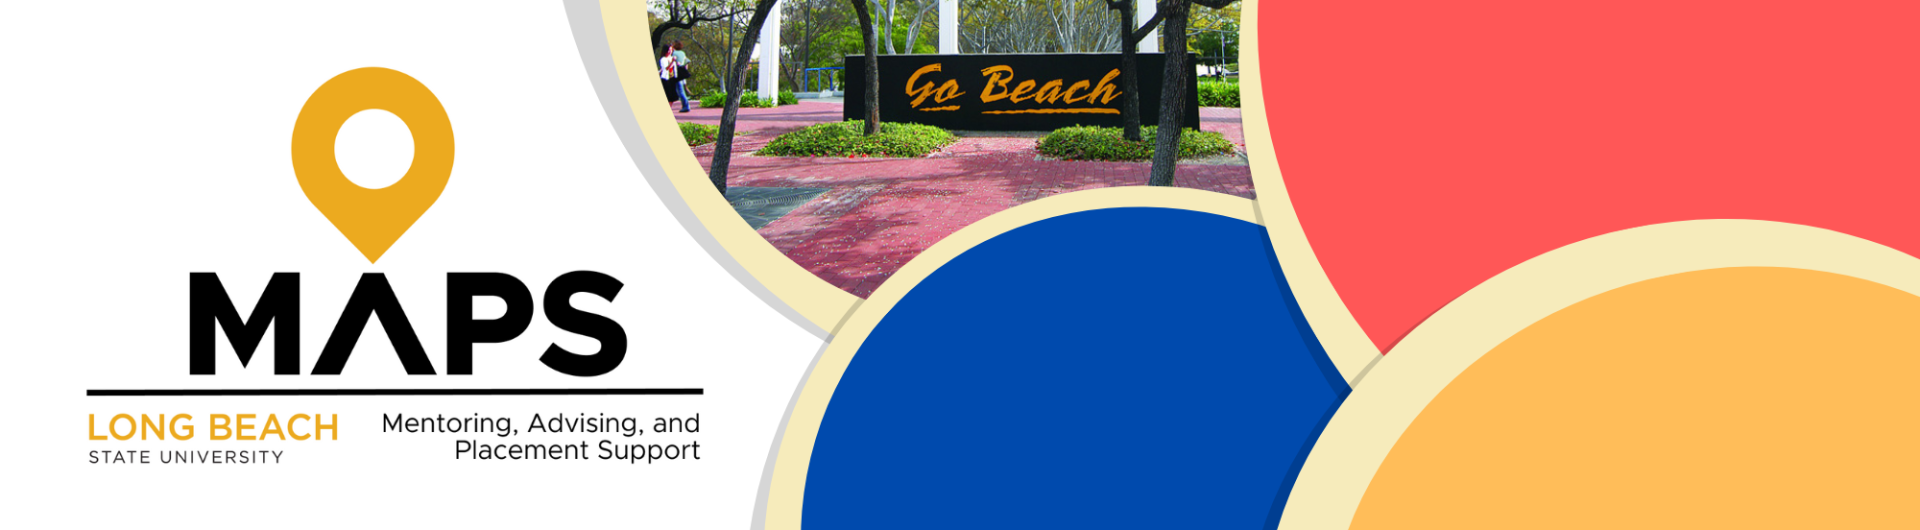 Red, yellow, blue circles, with Go Beach photo image and MAPS logo